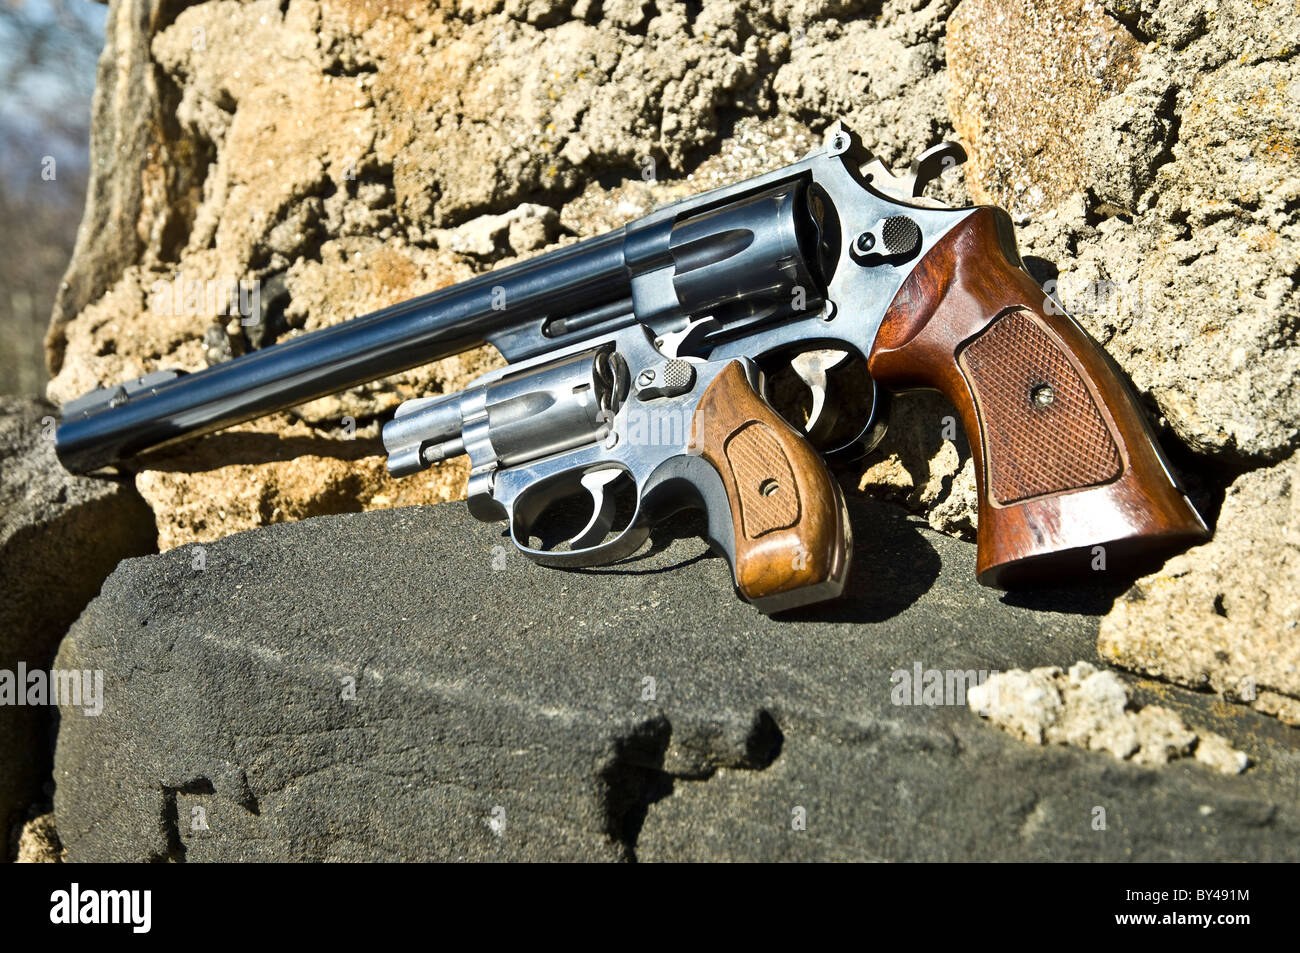 Two revolvers, one long barrel and one short, displayed on a wall outdoors. Stock Photo